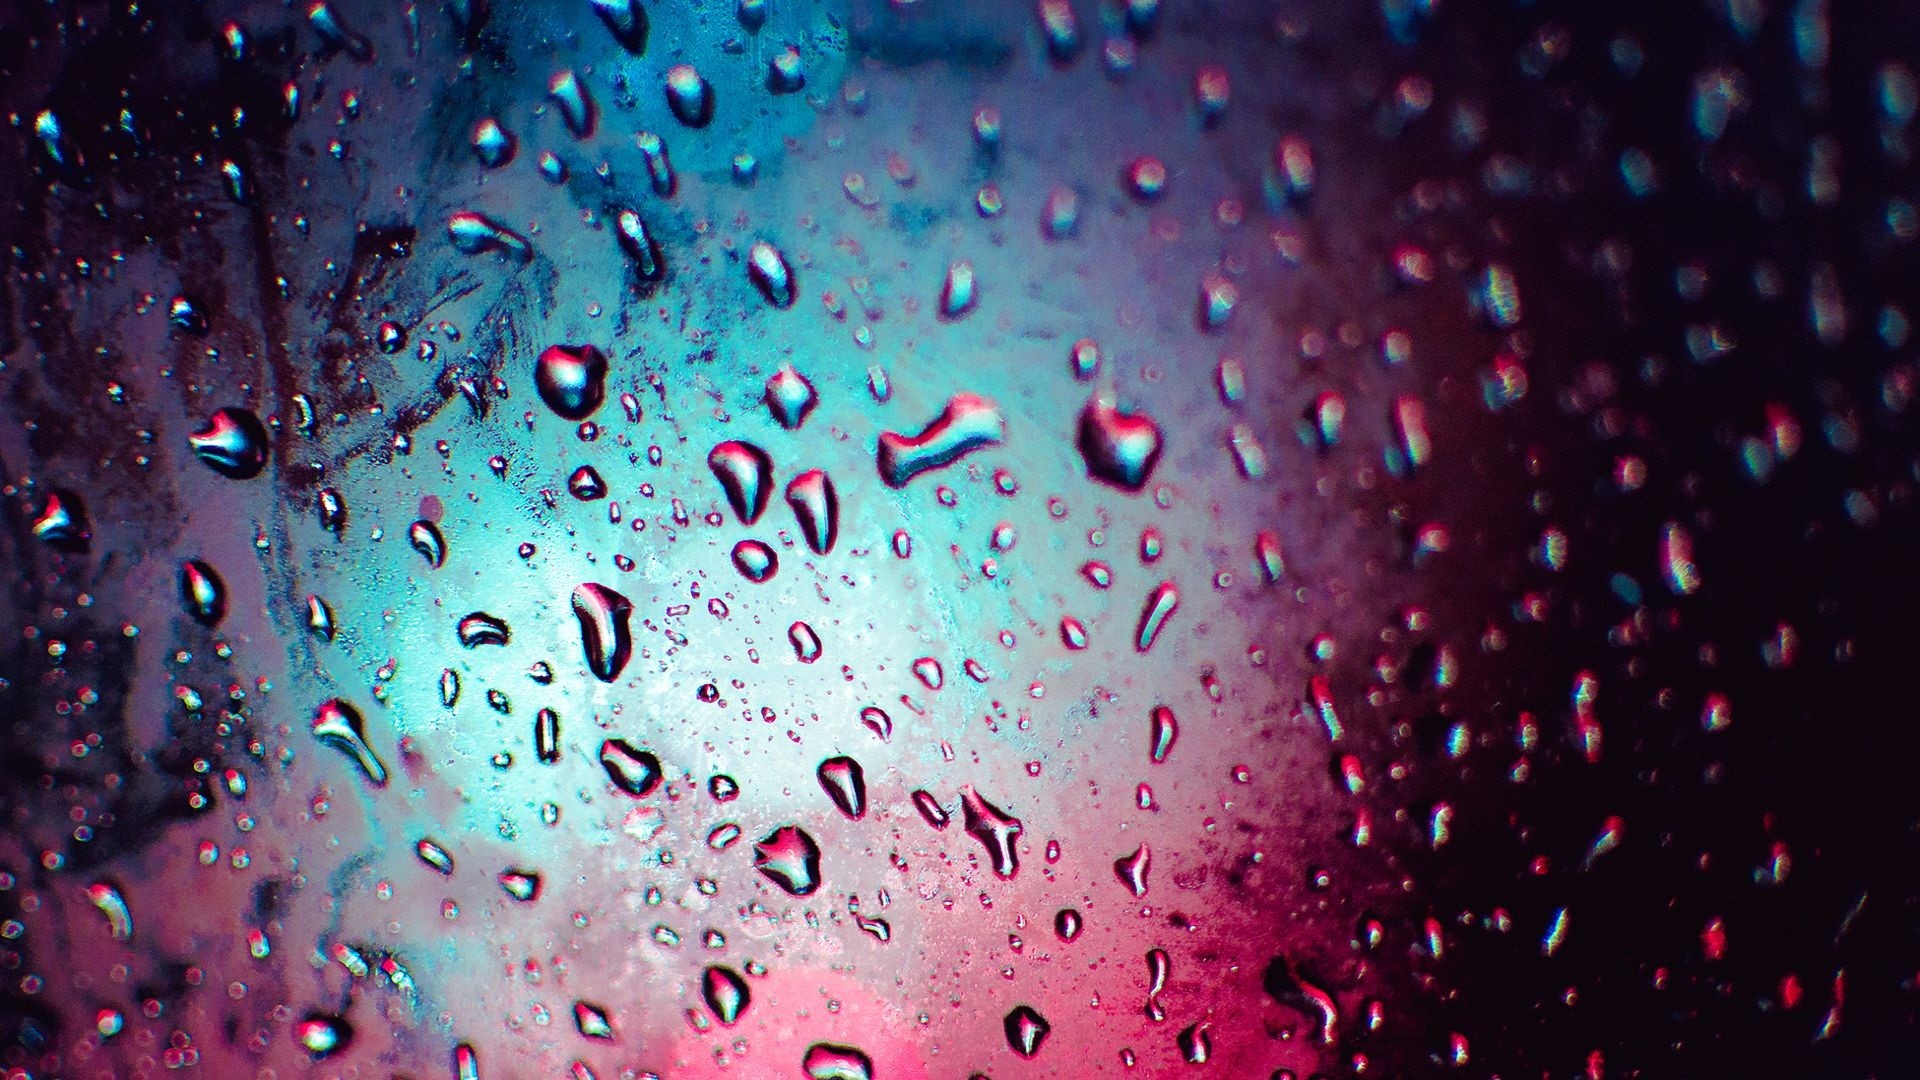 1920x1080 Find out: Water Drops On Glass wallpaper on http://hdpicorner.com